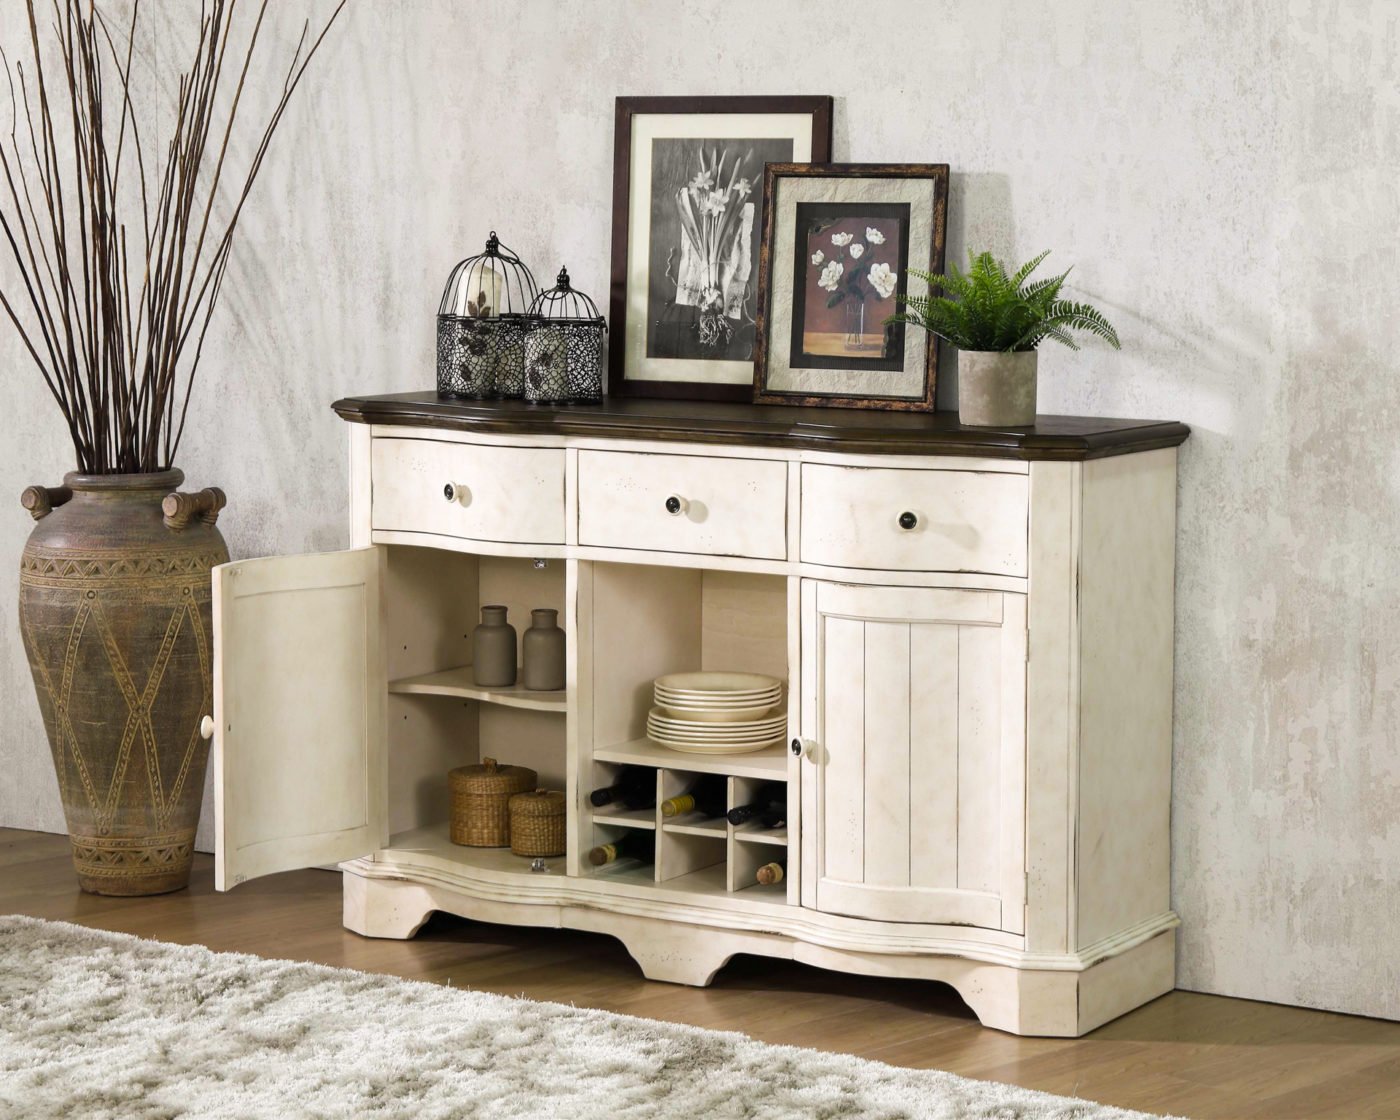 dining room furniture cabinets